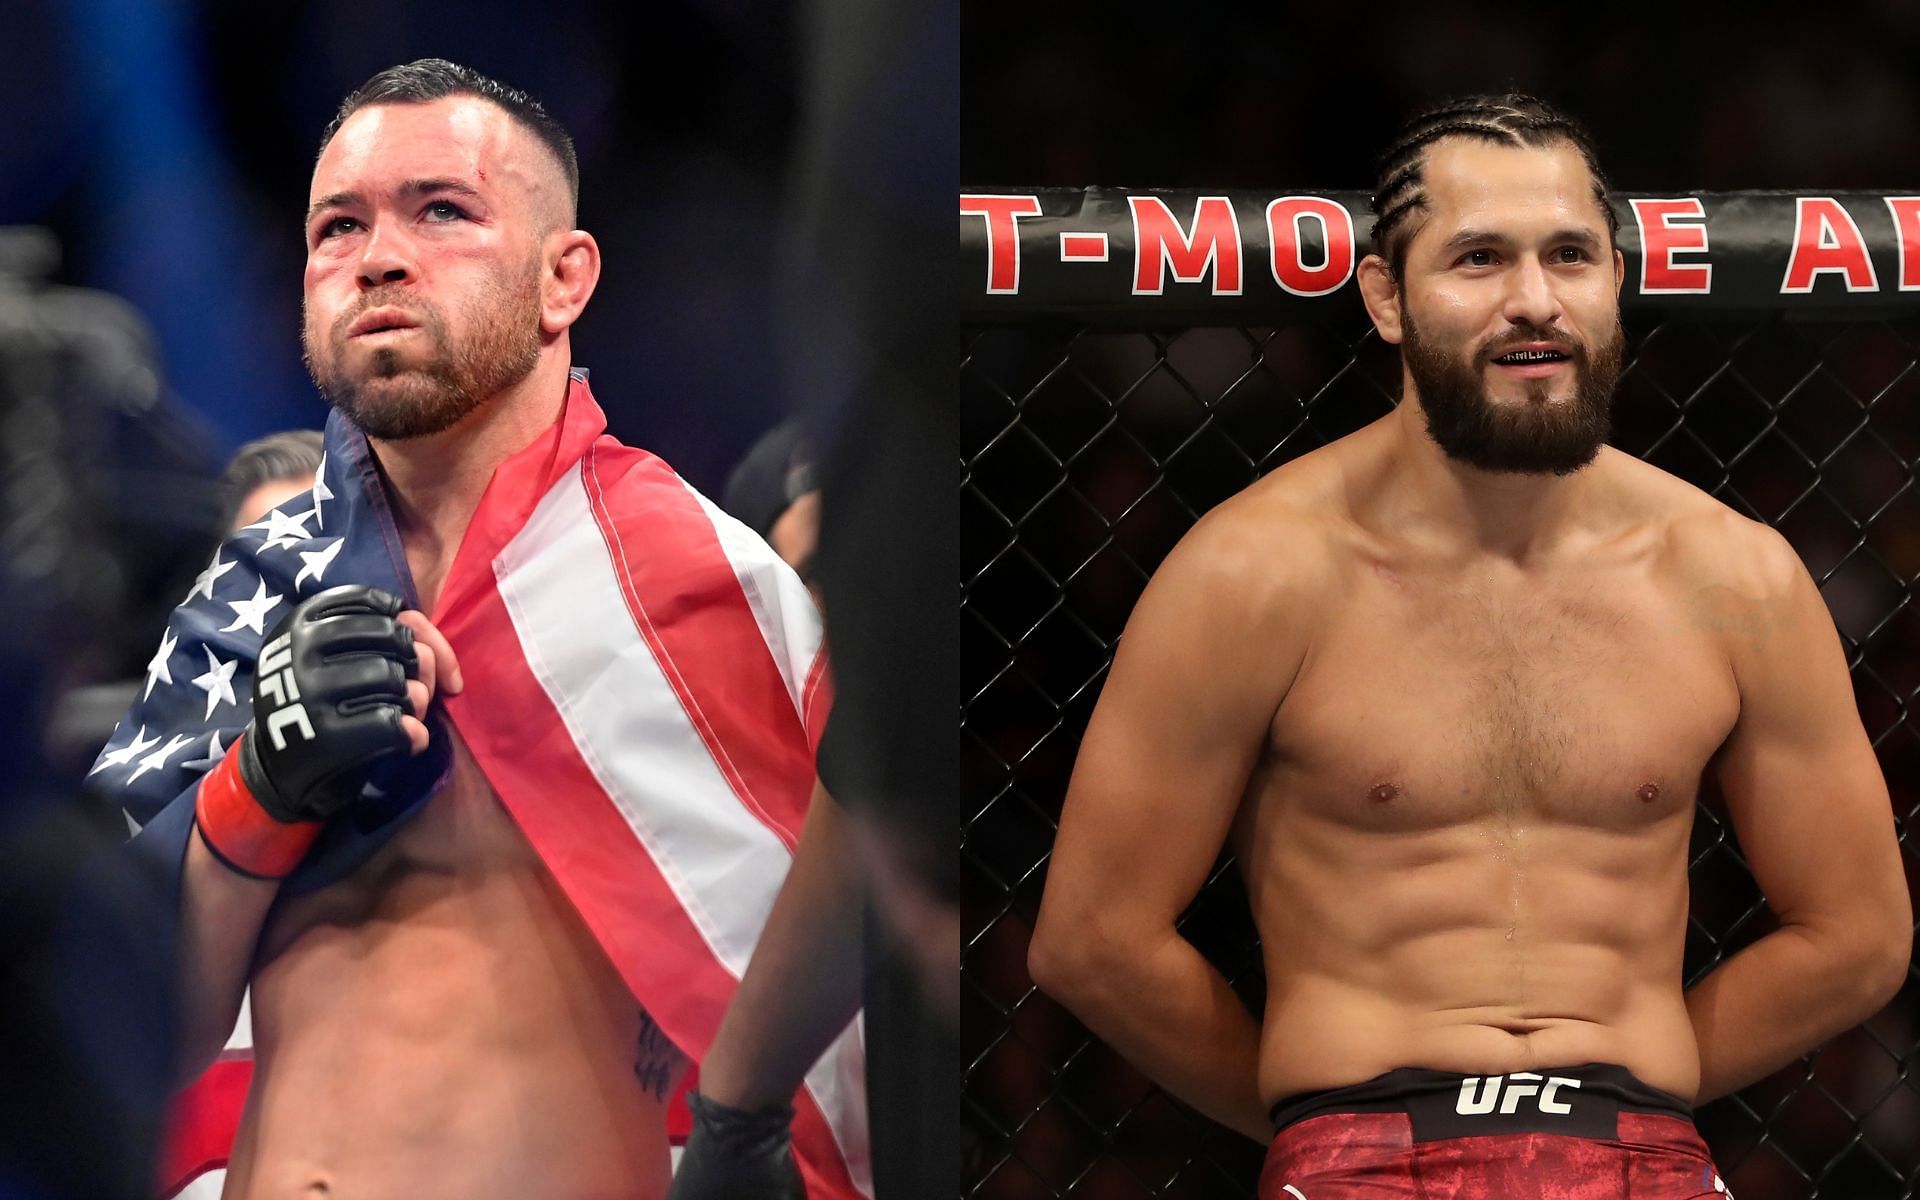 Colby Covington (left) and Jorge Masvidal (right) (Image credits Getty Images)